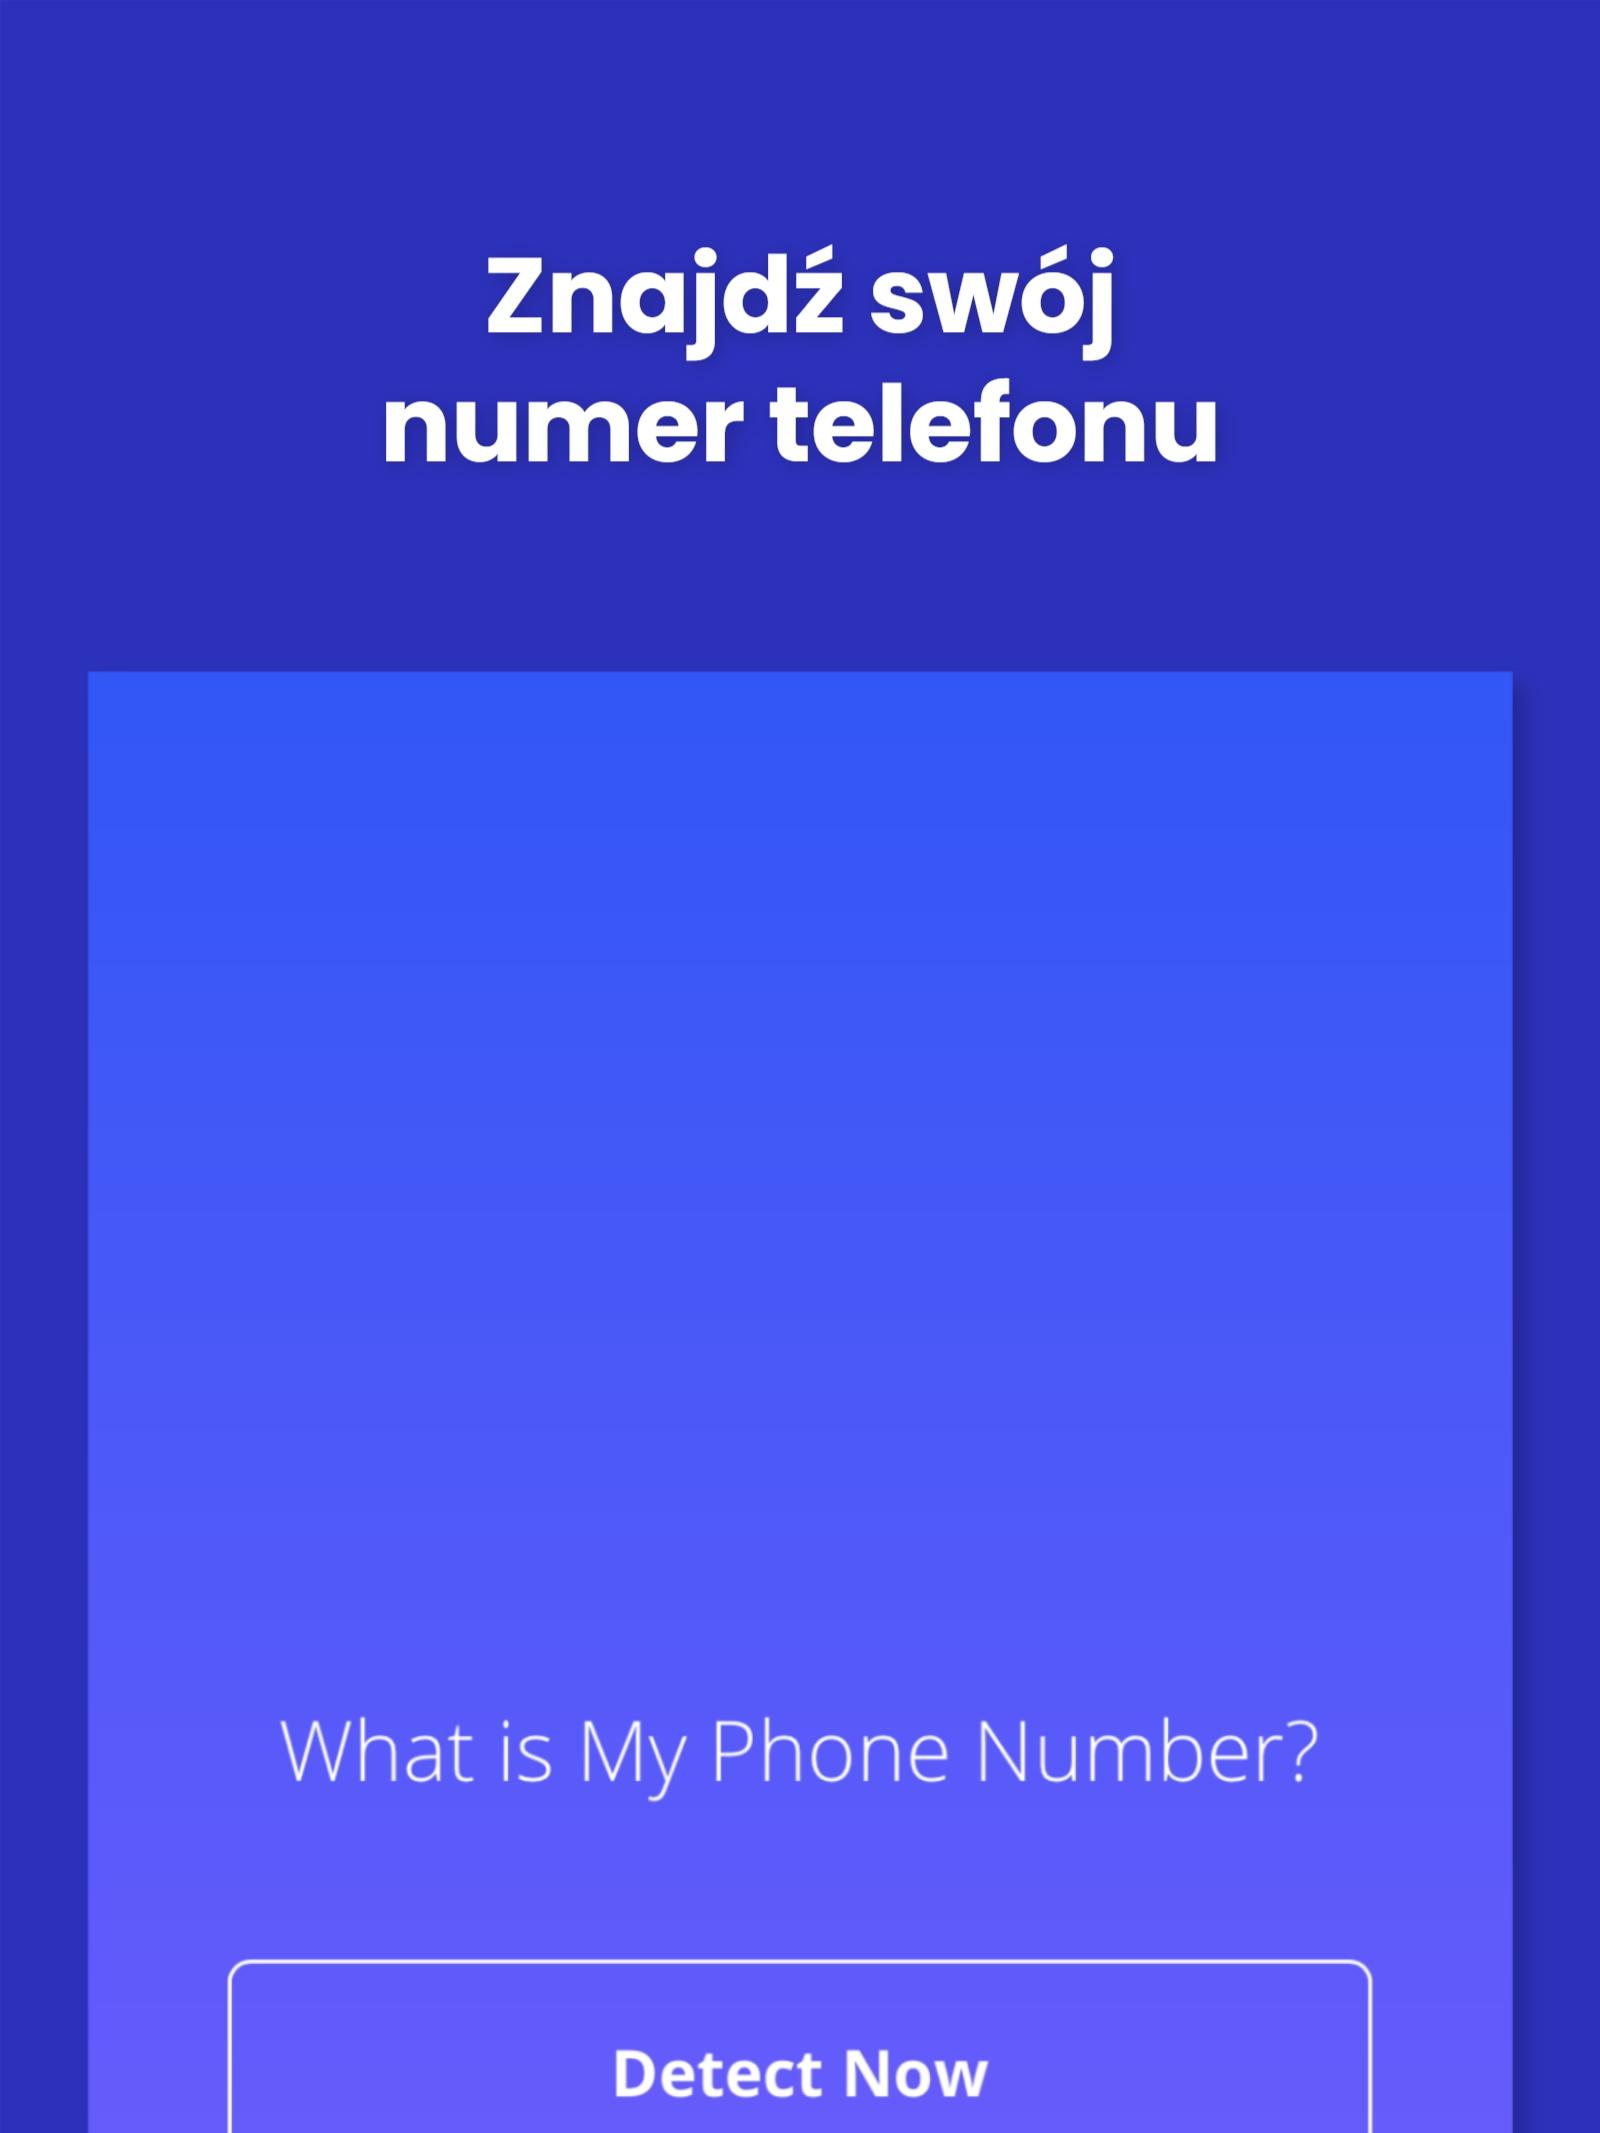 Mój numer telefonu - whatismynumer.io for Android - APK Download